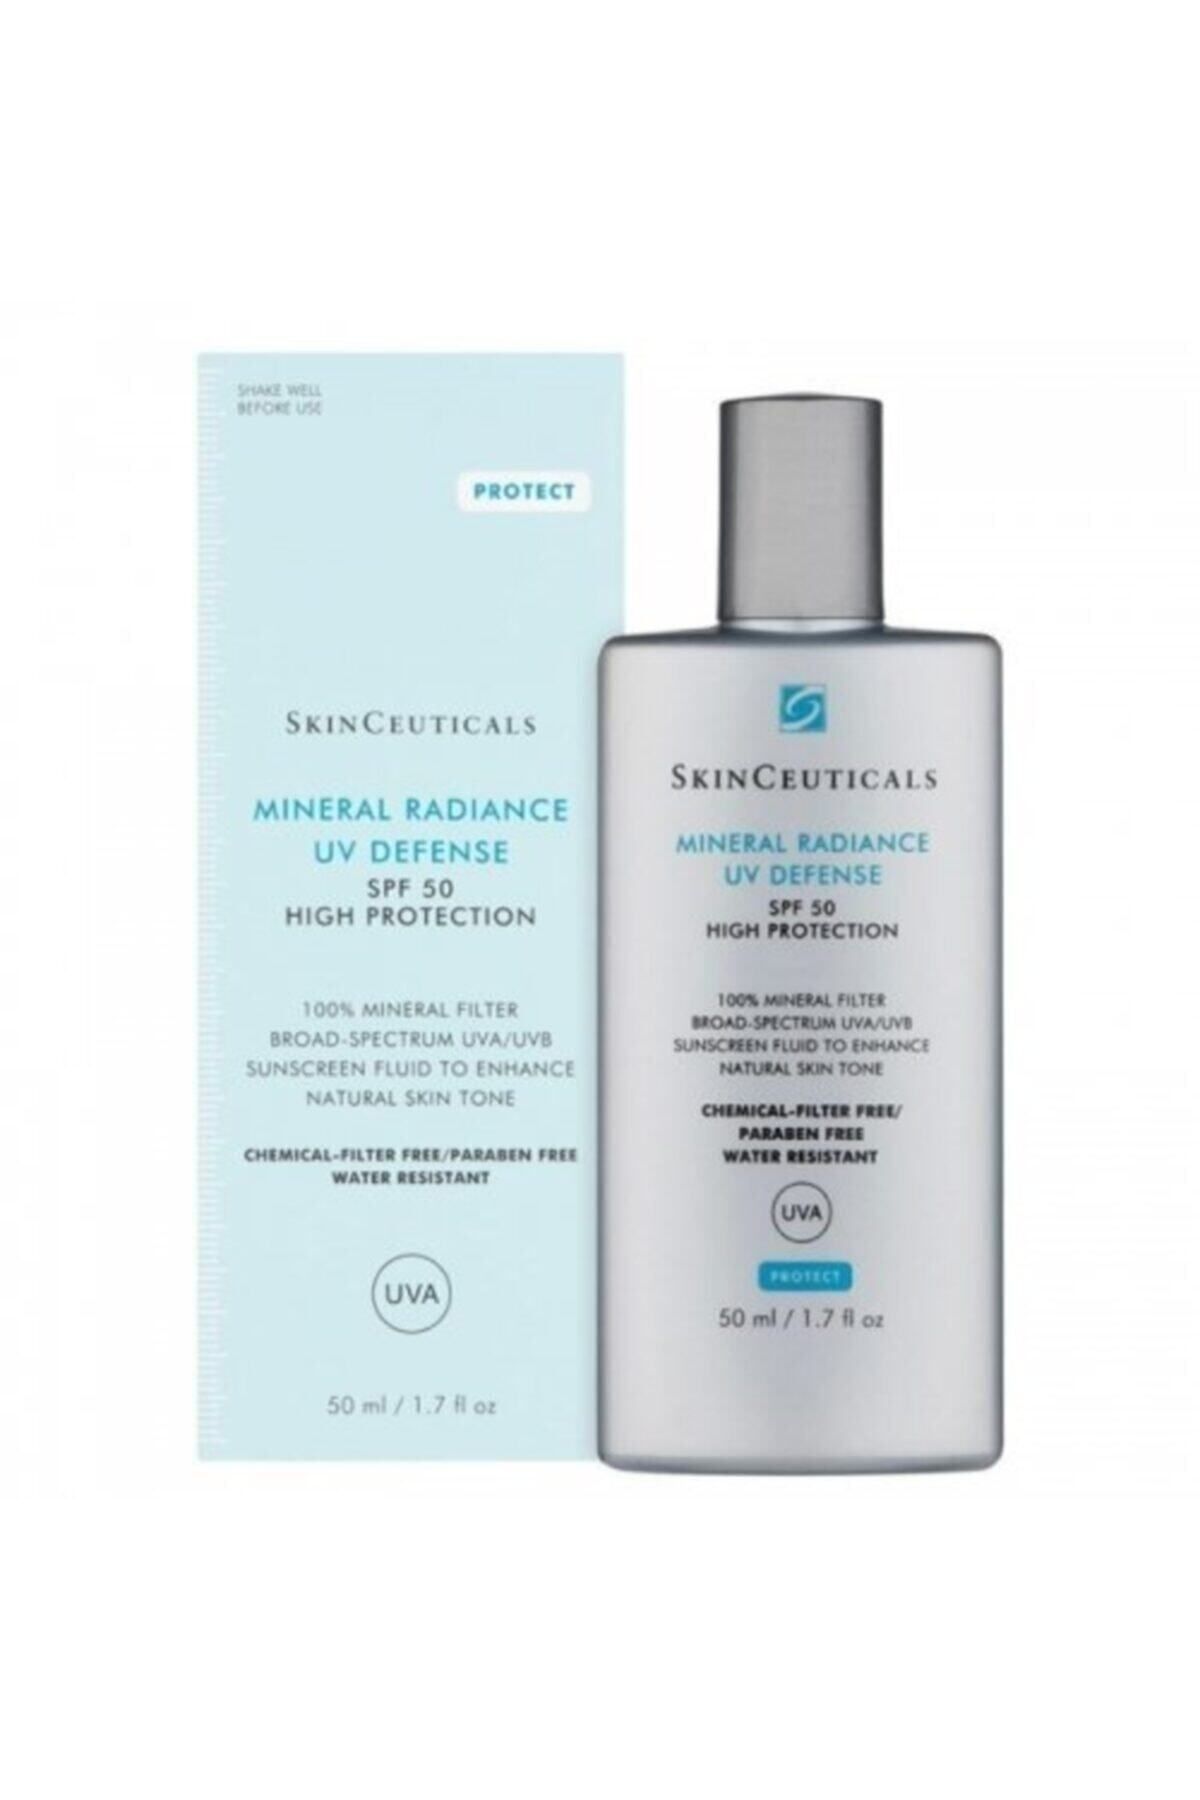 Skinceuticals CONCEALER ON SKİN IMPERFECTİONS -SPF50 HİGH PROTECTİON COLORED SUNSCREEN 50 ML PSSN1705